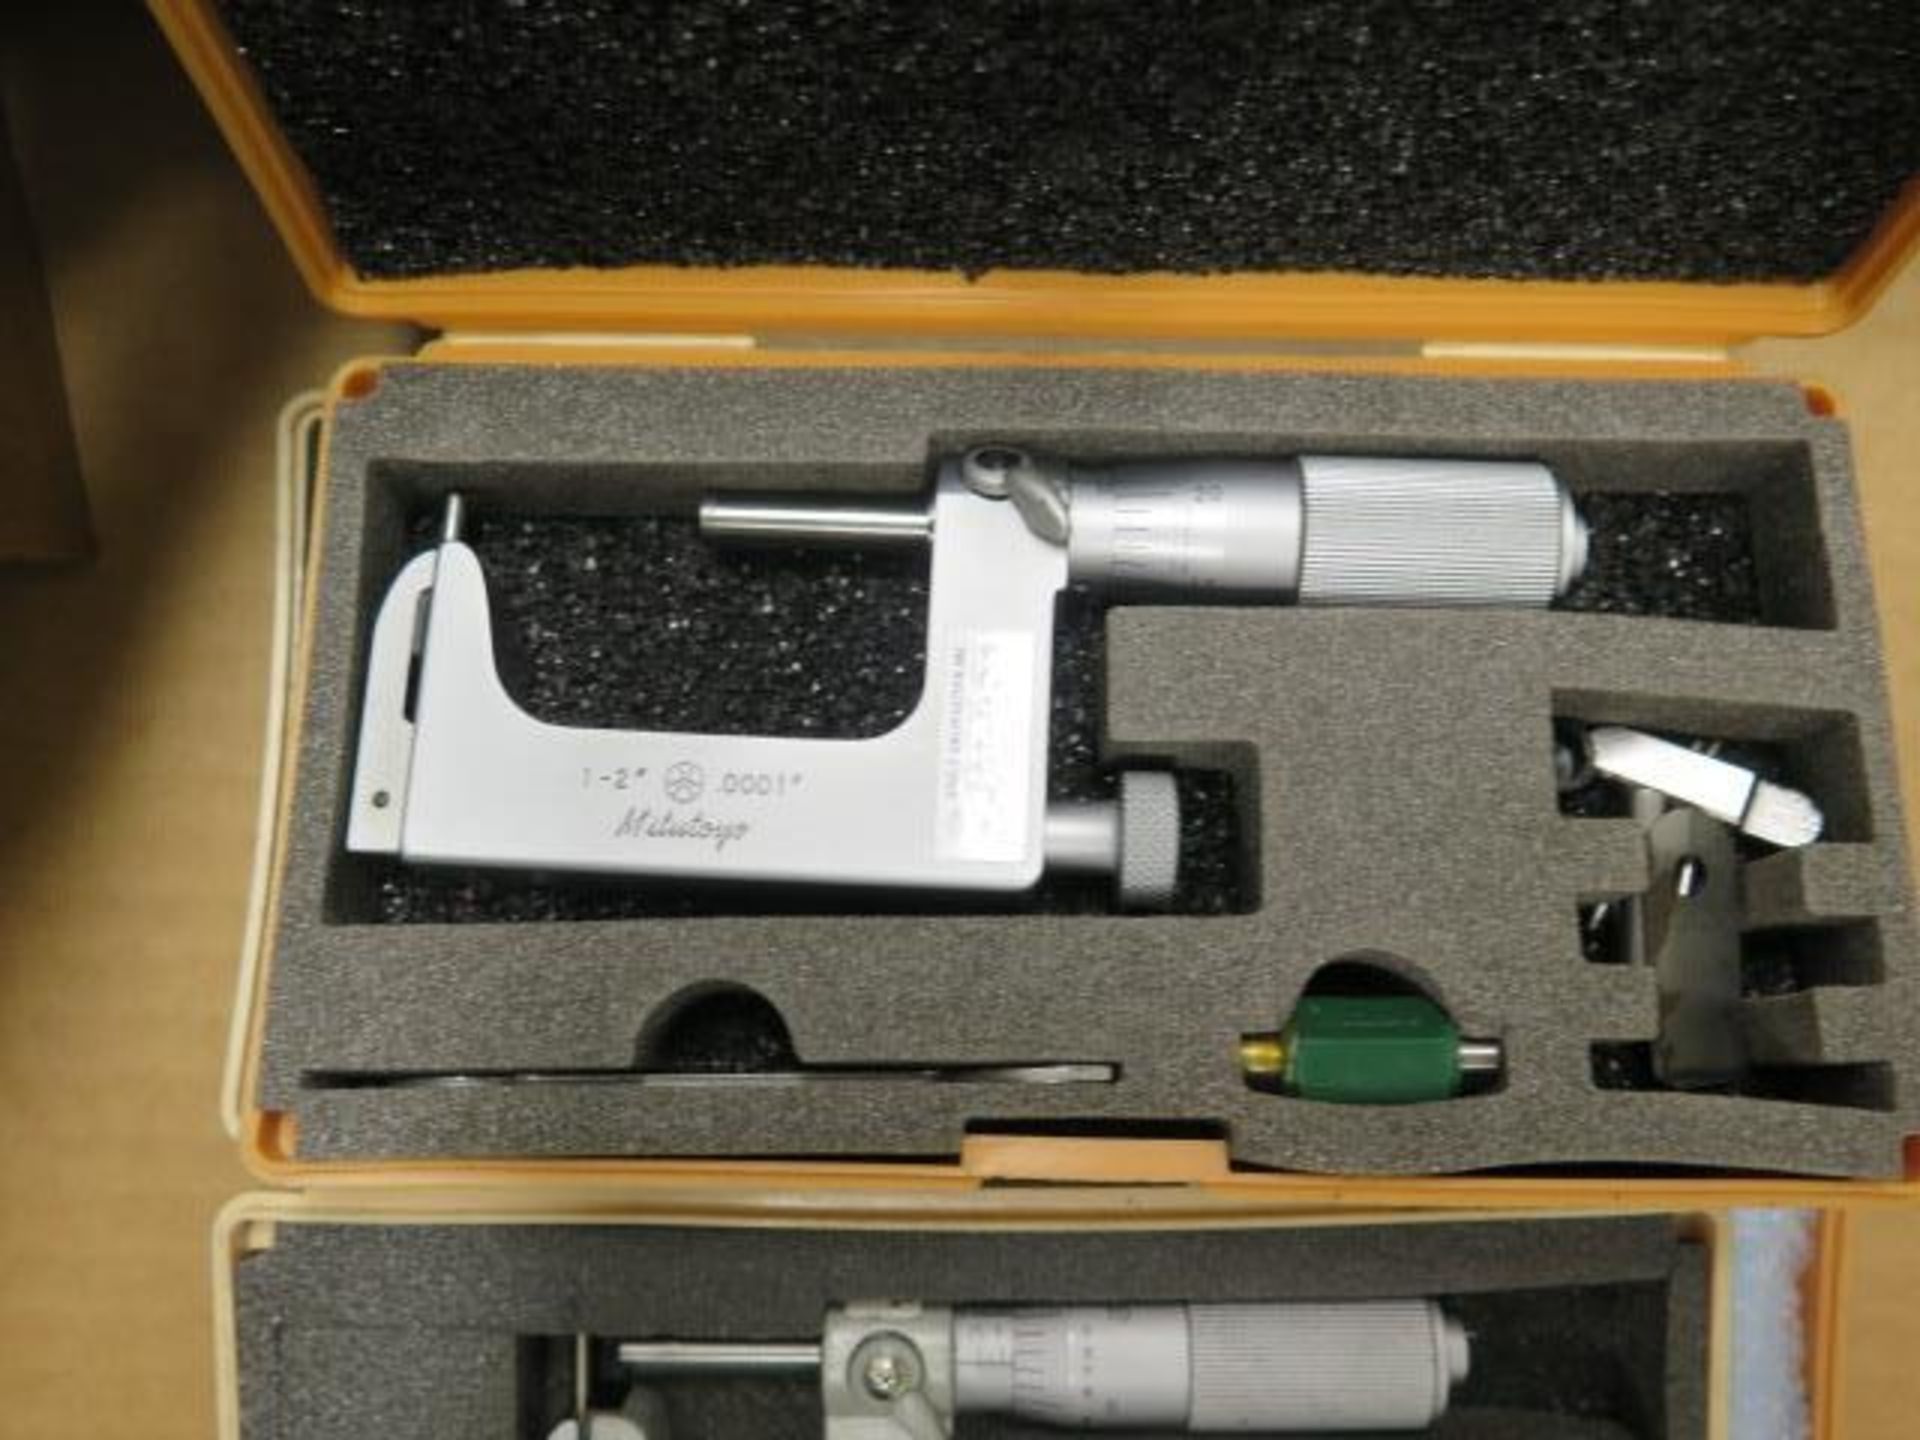 Mitutoyo 0-1" Anvil Mic, 1"-2" Anvil Mic and 0-1" Point Mic (SOLD AS-IS - NO WARRANTY) - Image 3 of 5